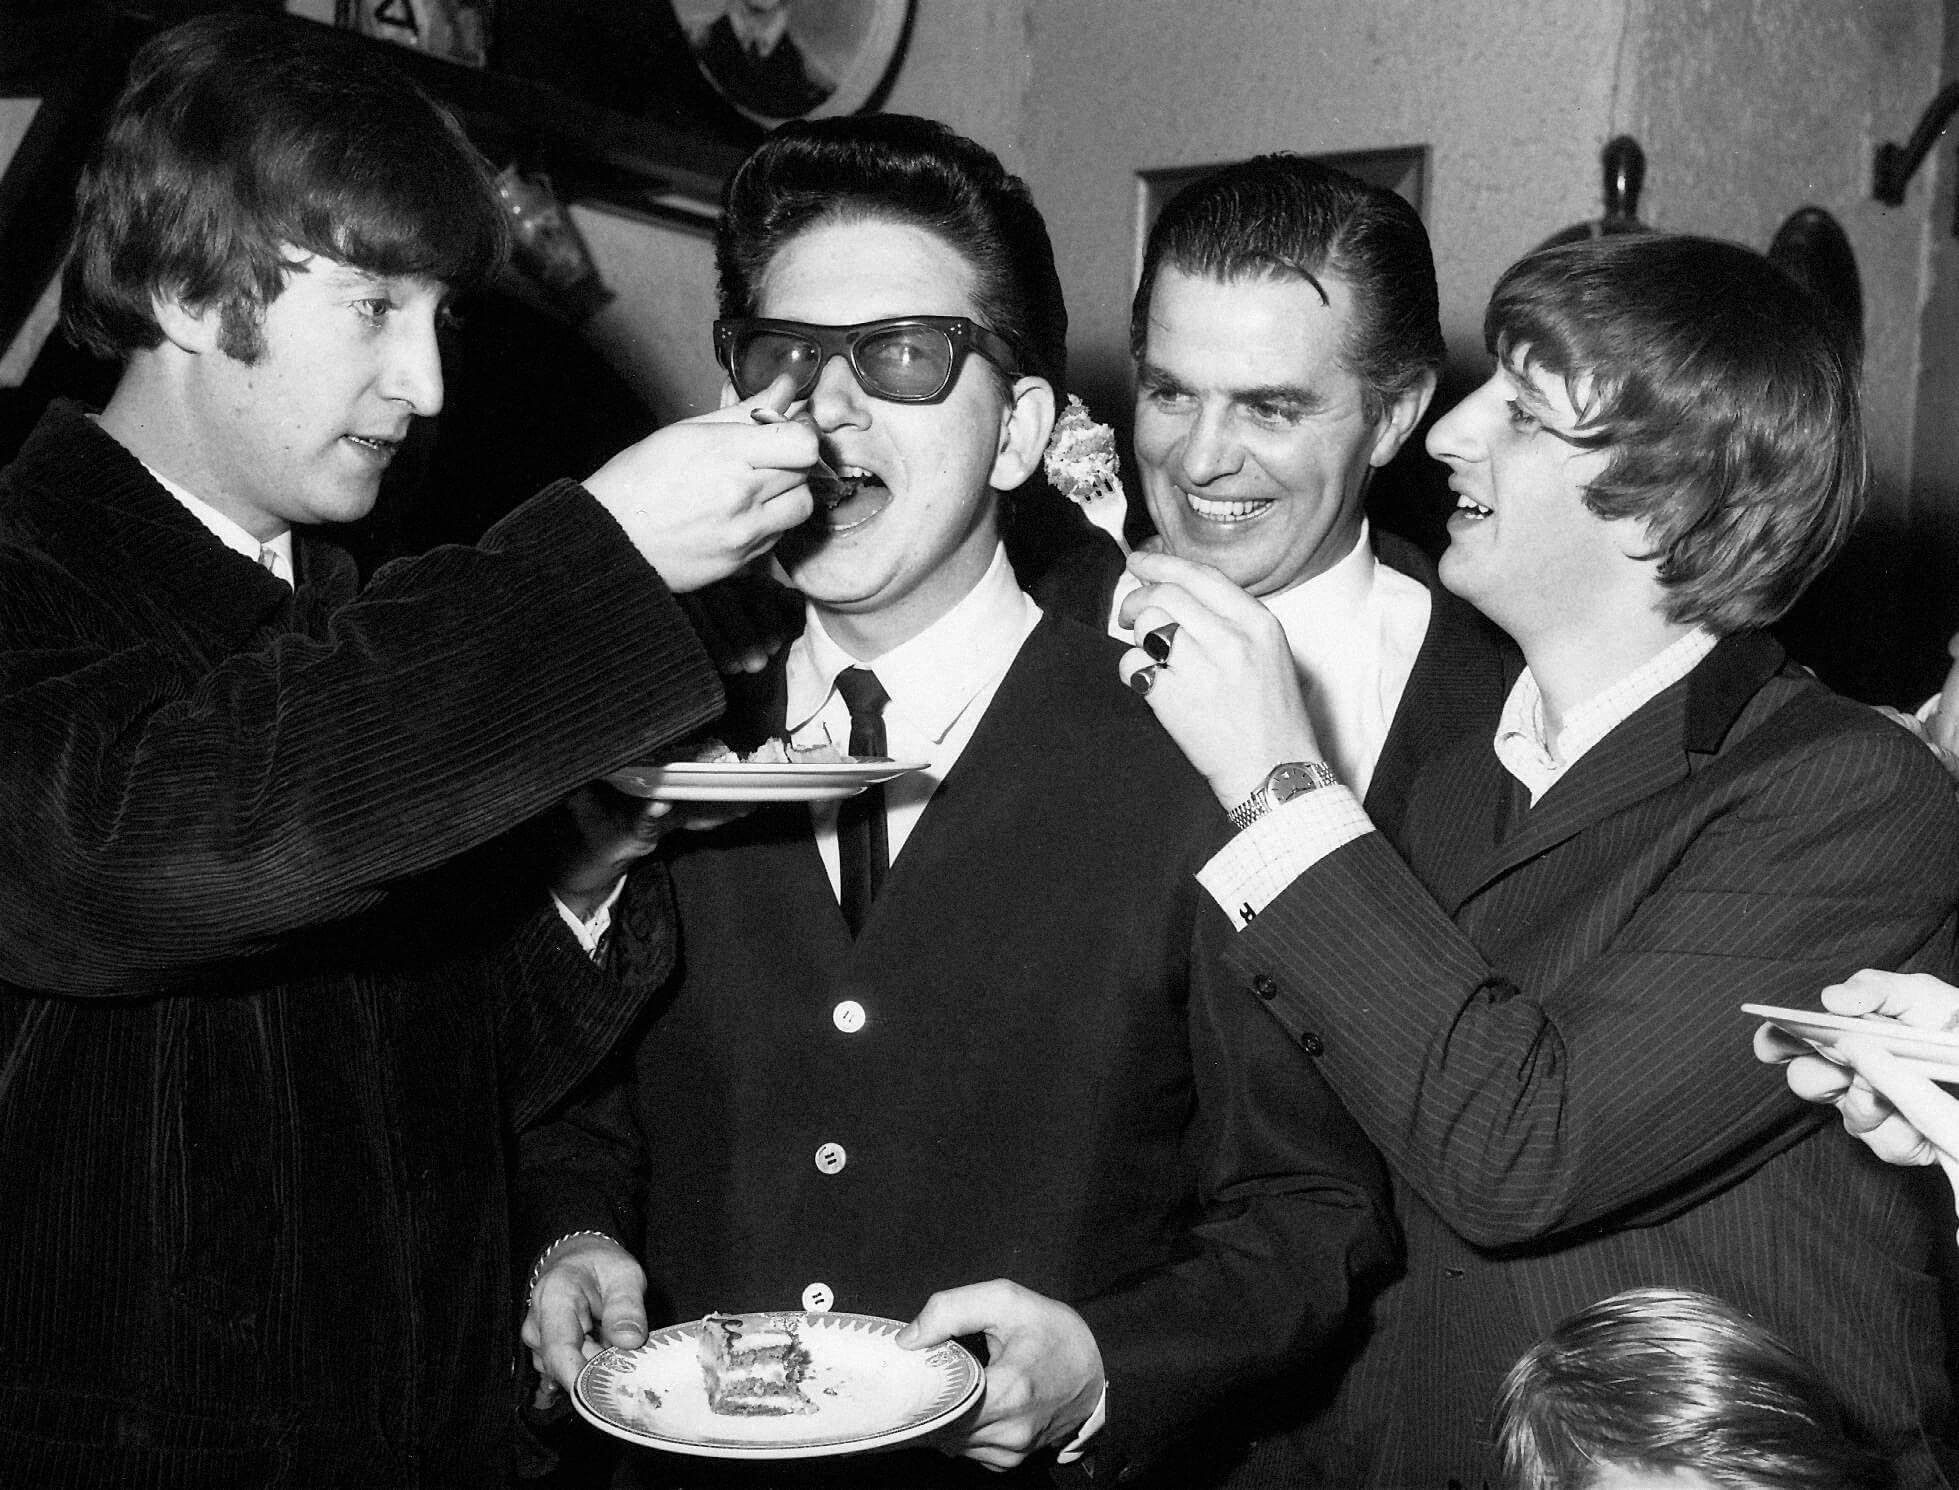 The Beatles and Roy Orbison in black-and-white during the "Oh, Pretty Woman" days